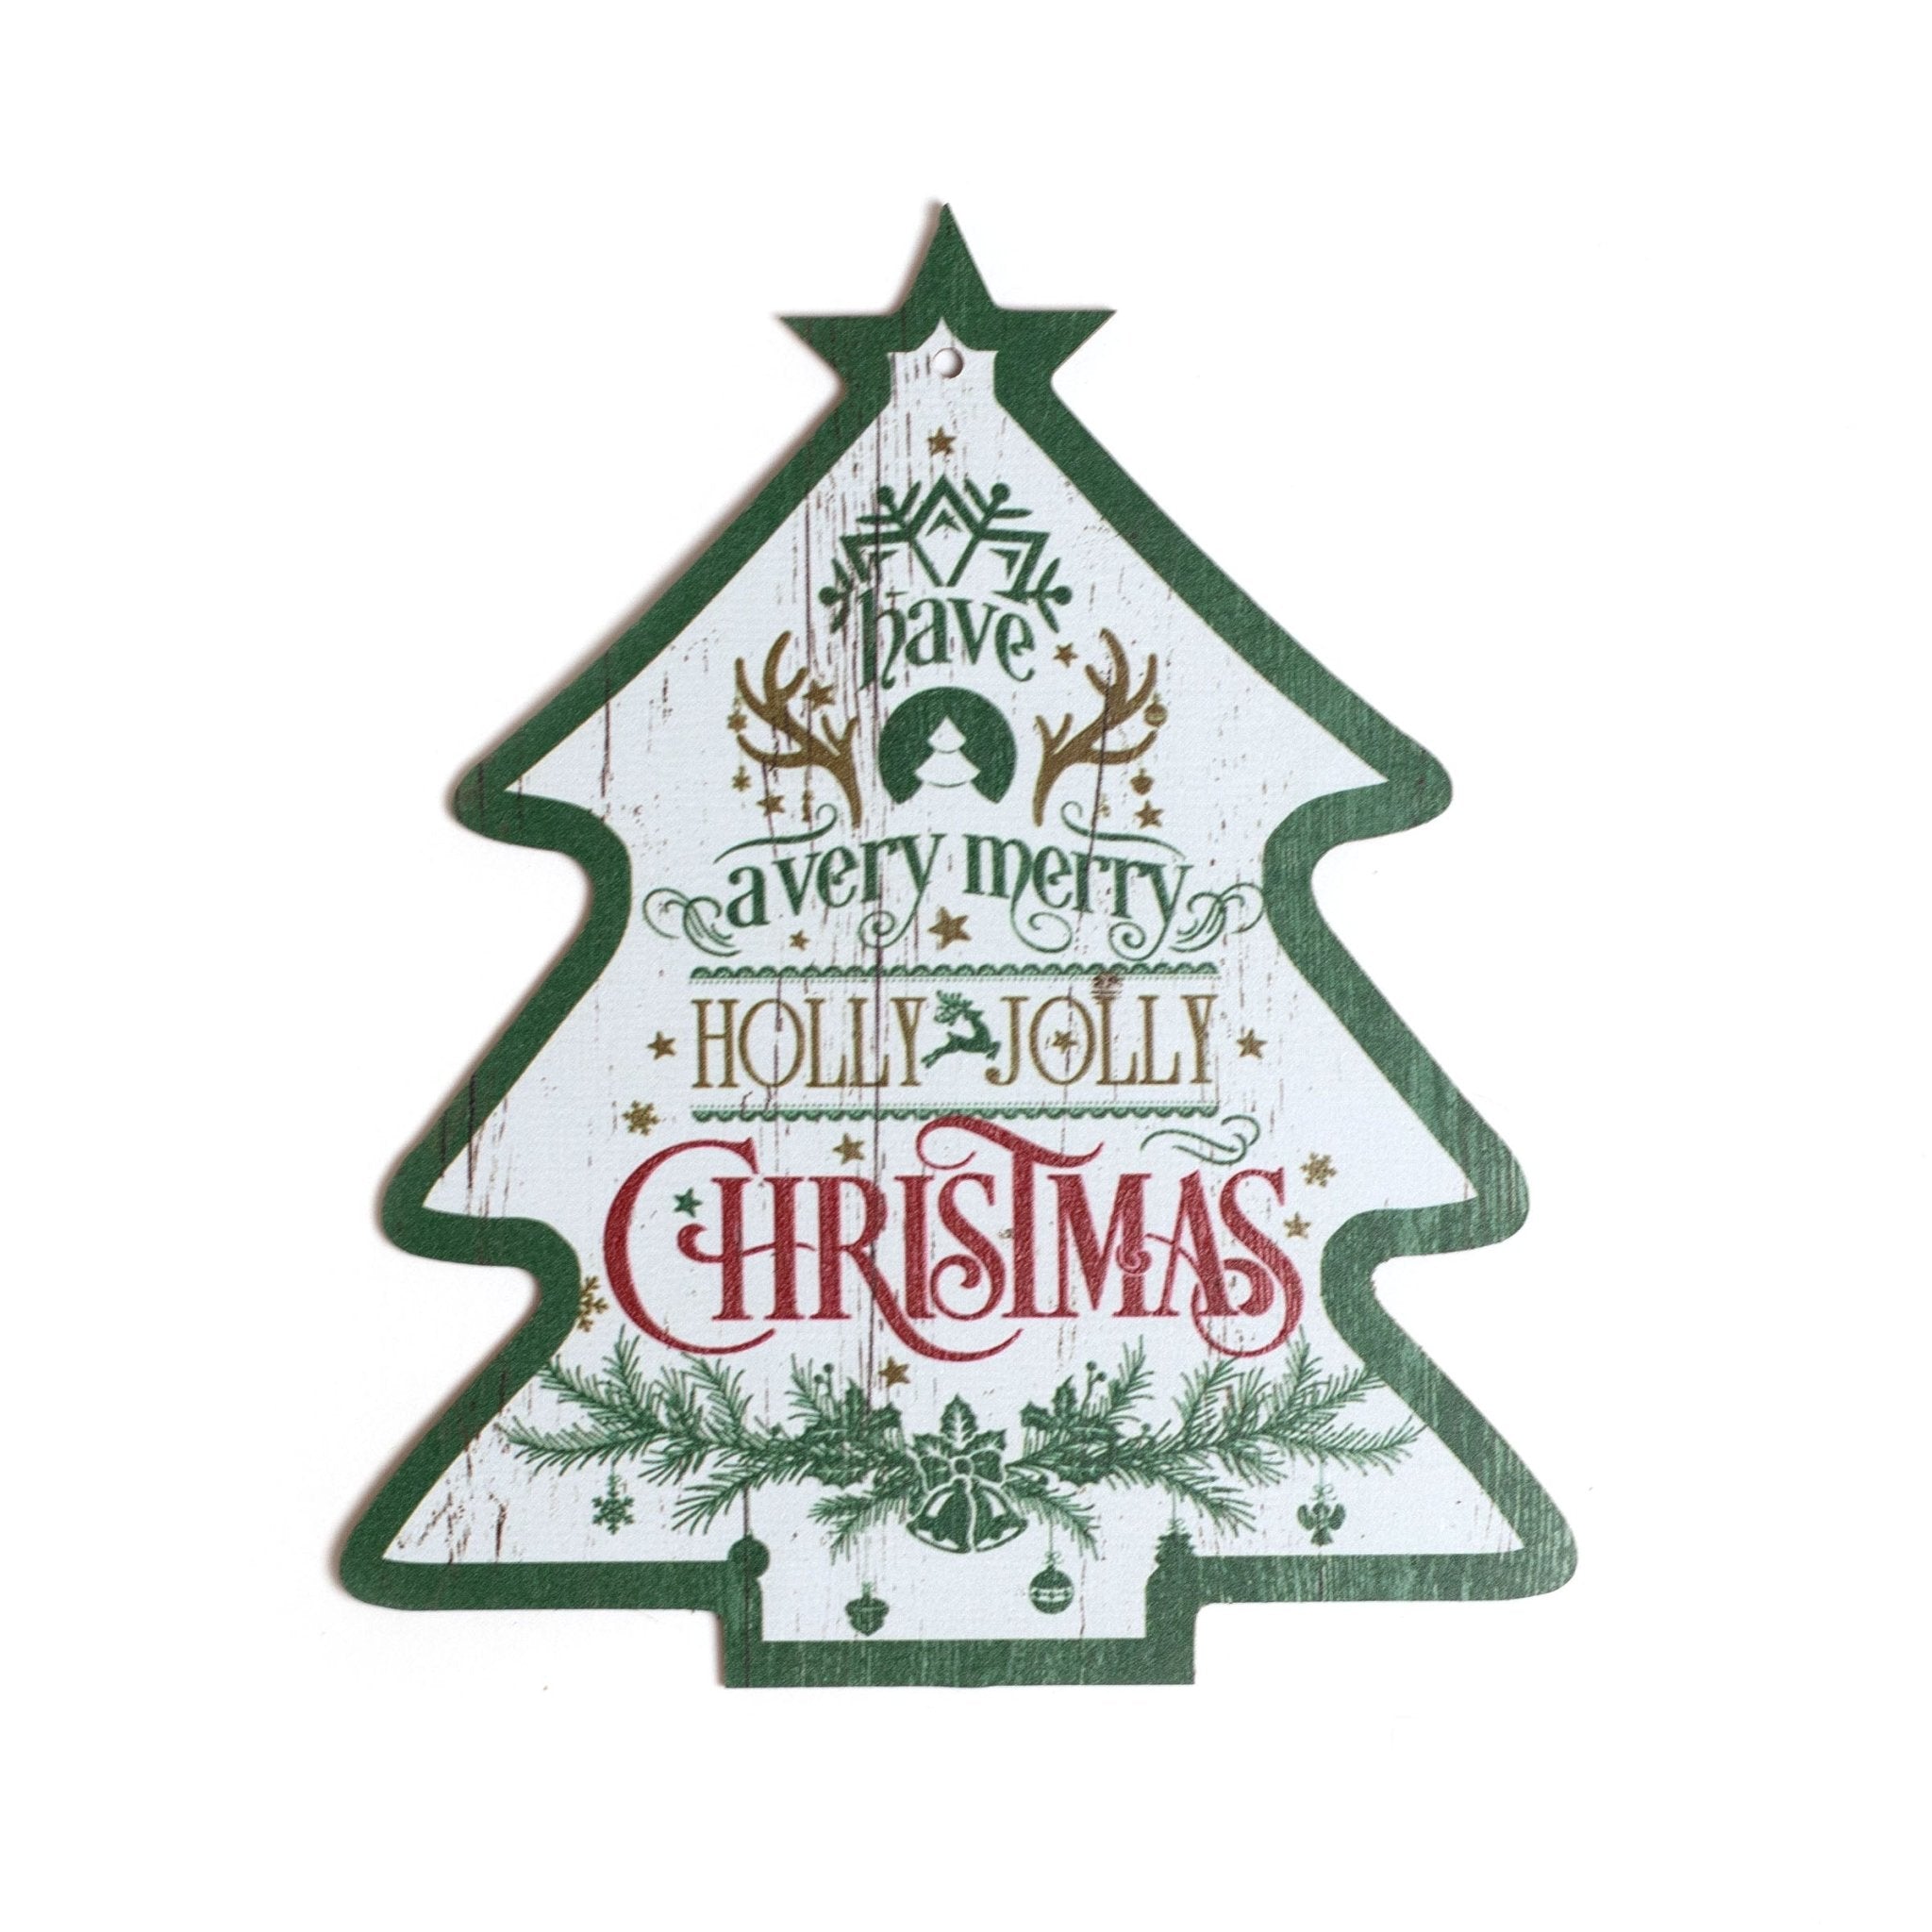 Have a Very Merry Holly Jolly Christmas Tree Wooden Sign 15x18cm 1518001 - MODA FLORA Santa's Workshop